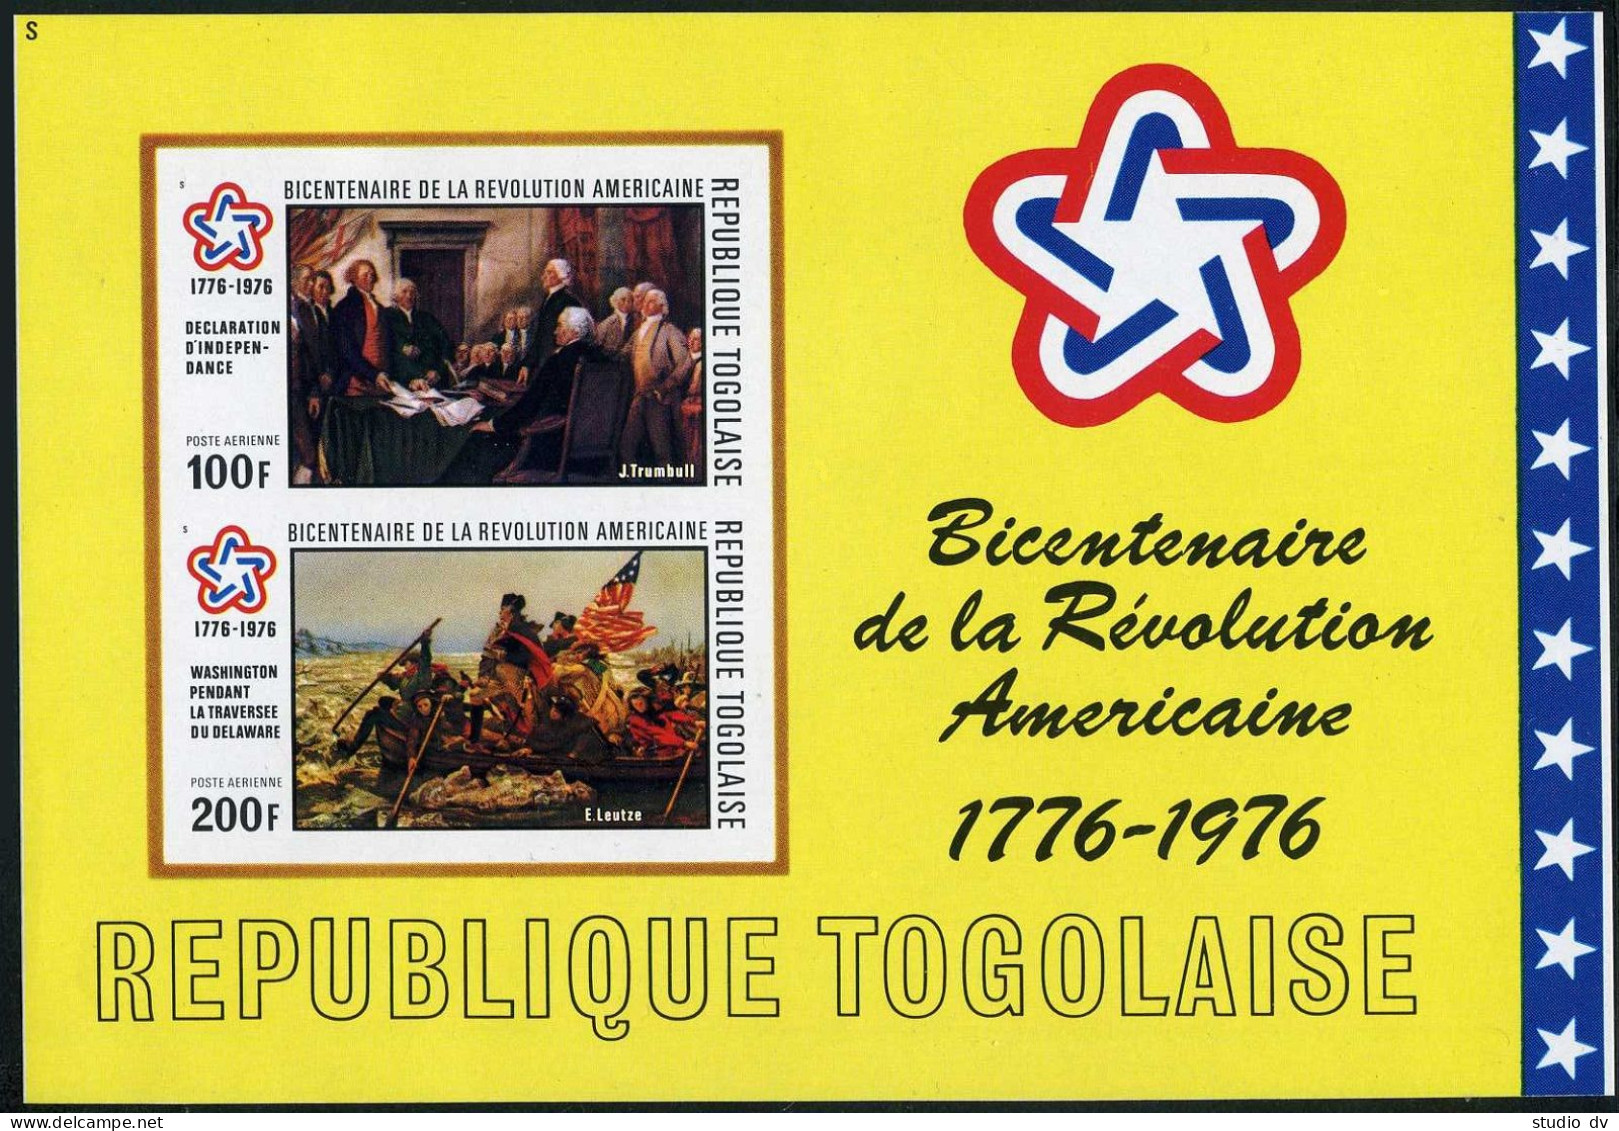 Togo C273a Perf.imperf.MNH.Michel Bl.101A-101B. USA-200,1976.Paintings:Trumbull, - Togo (1960-...)